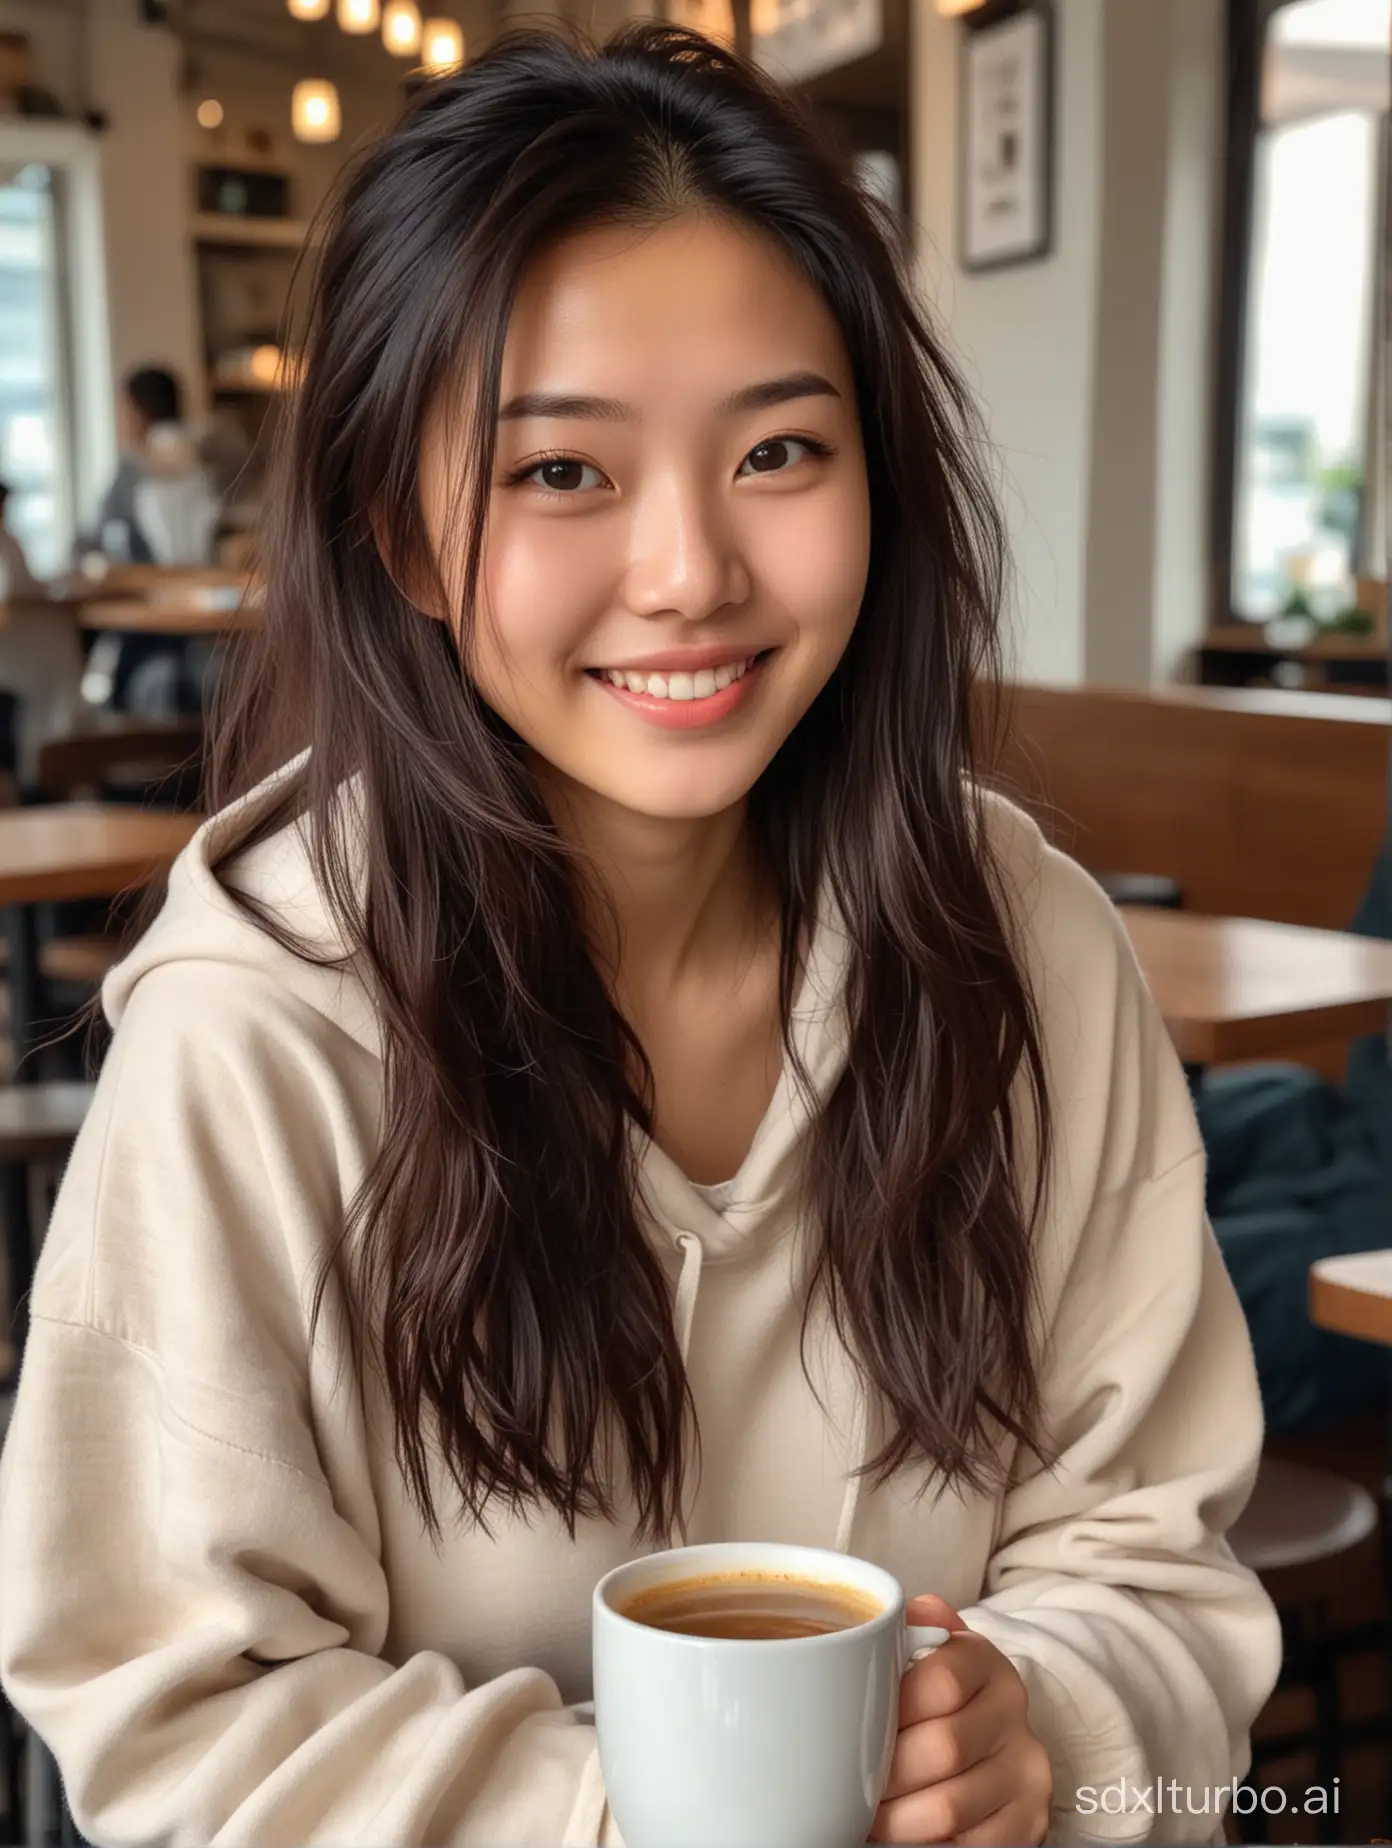 A 24-year-old Chinese girl, with long hair, small wavy hair, light-colored hoodie, sitting in a coffee shop, sitting behind a coffee table, holding a cup of coffee in her hands, smiling.